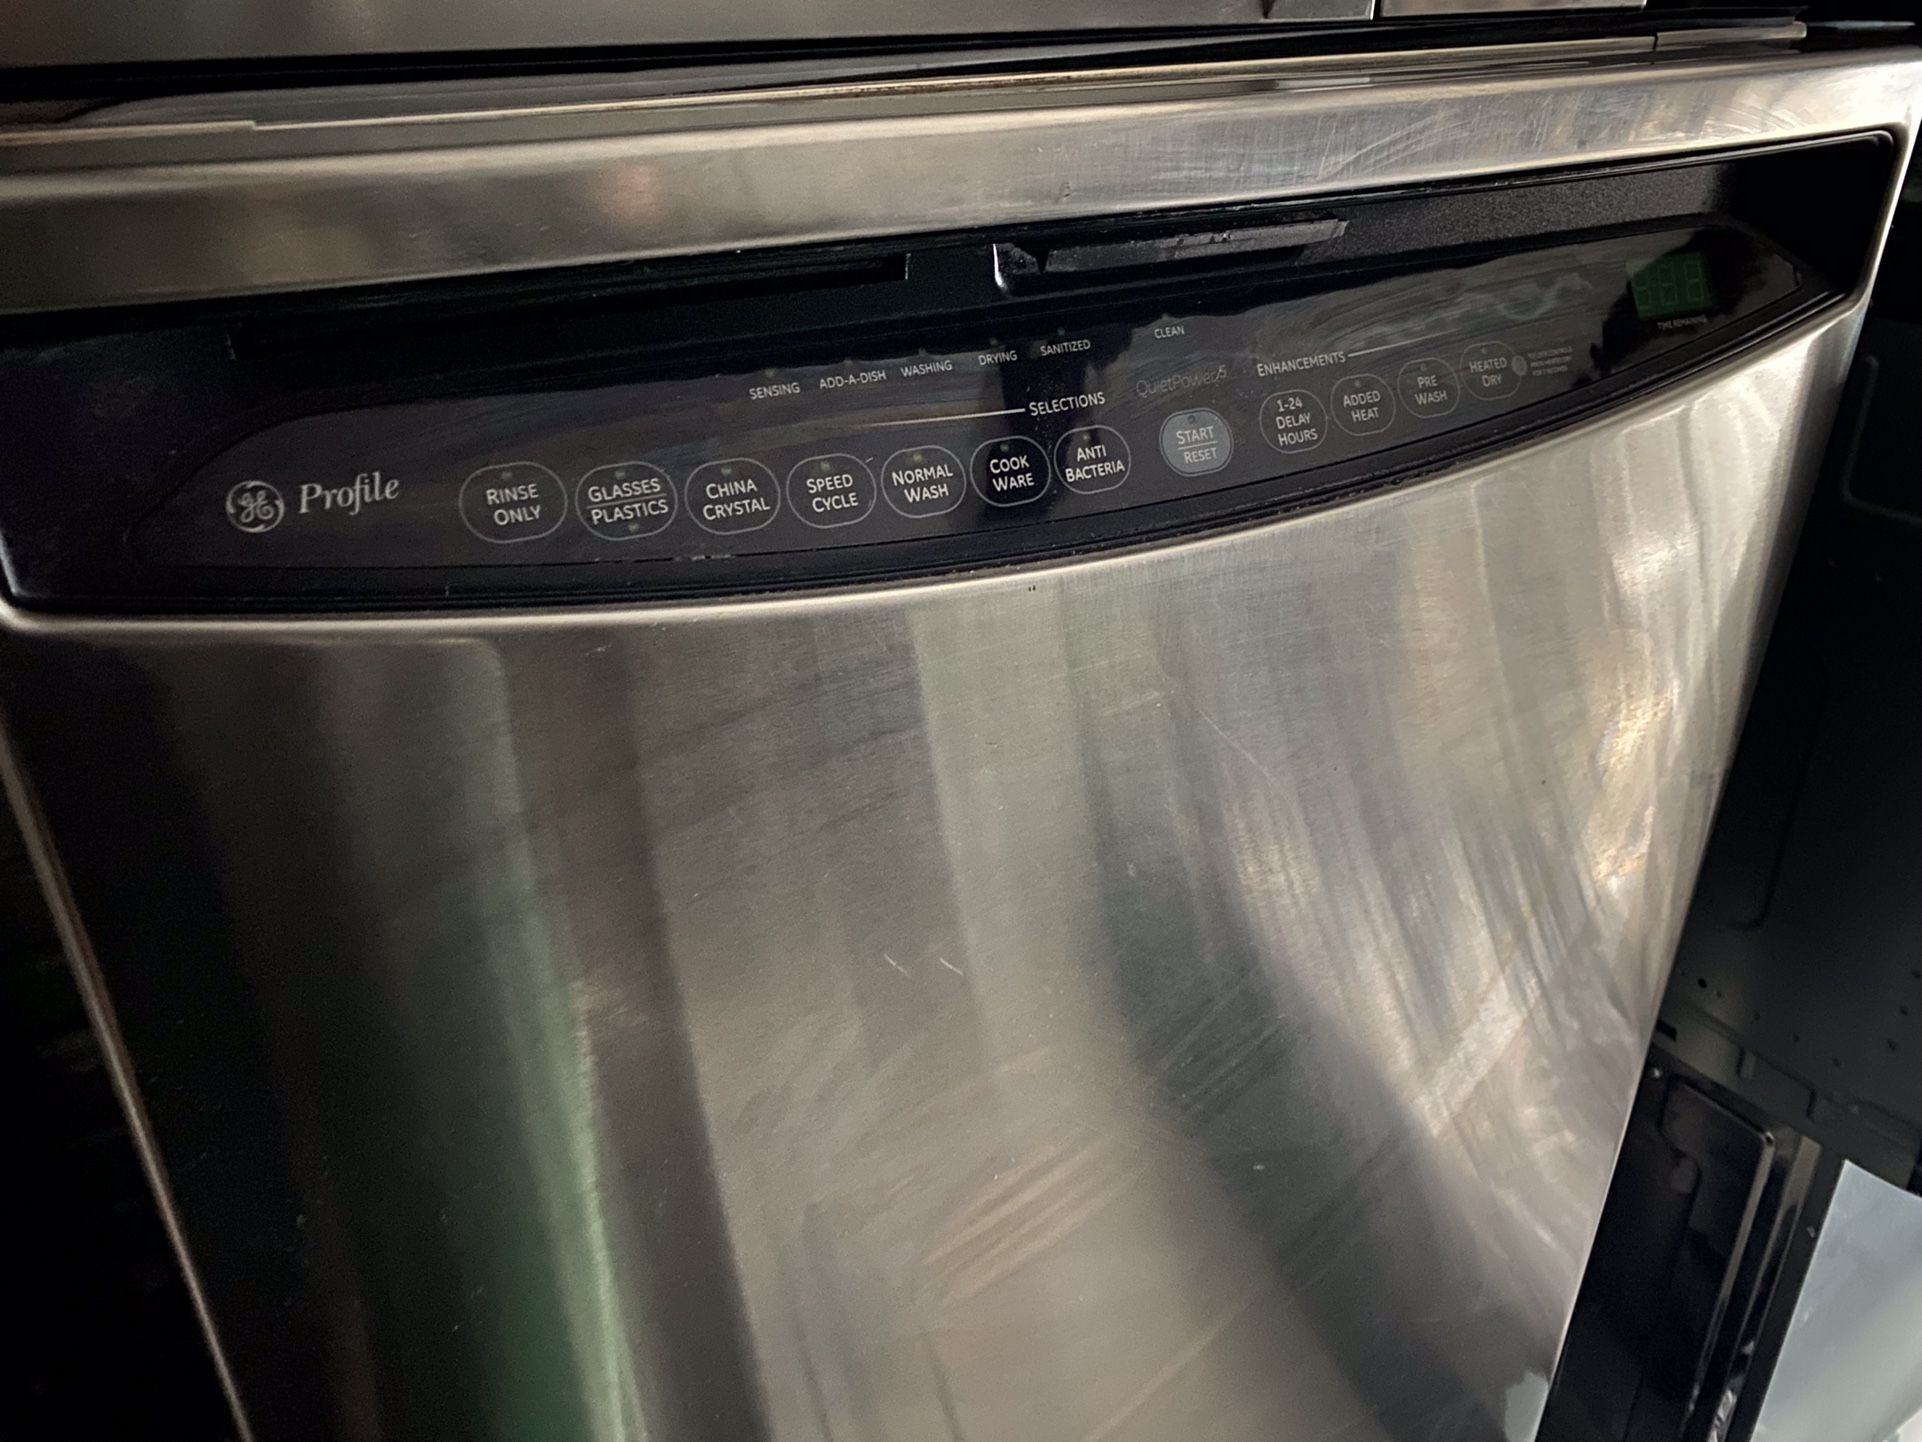 GE Profile Stainless Steel Dishwasher And GE Profile Over The Range Microwave 